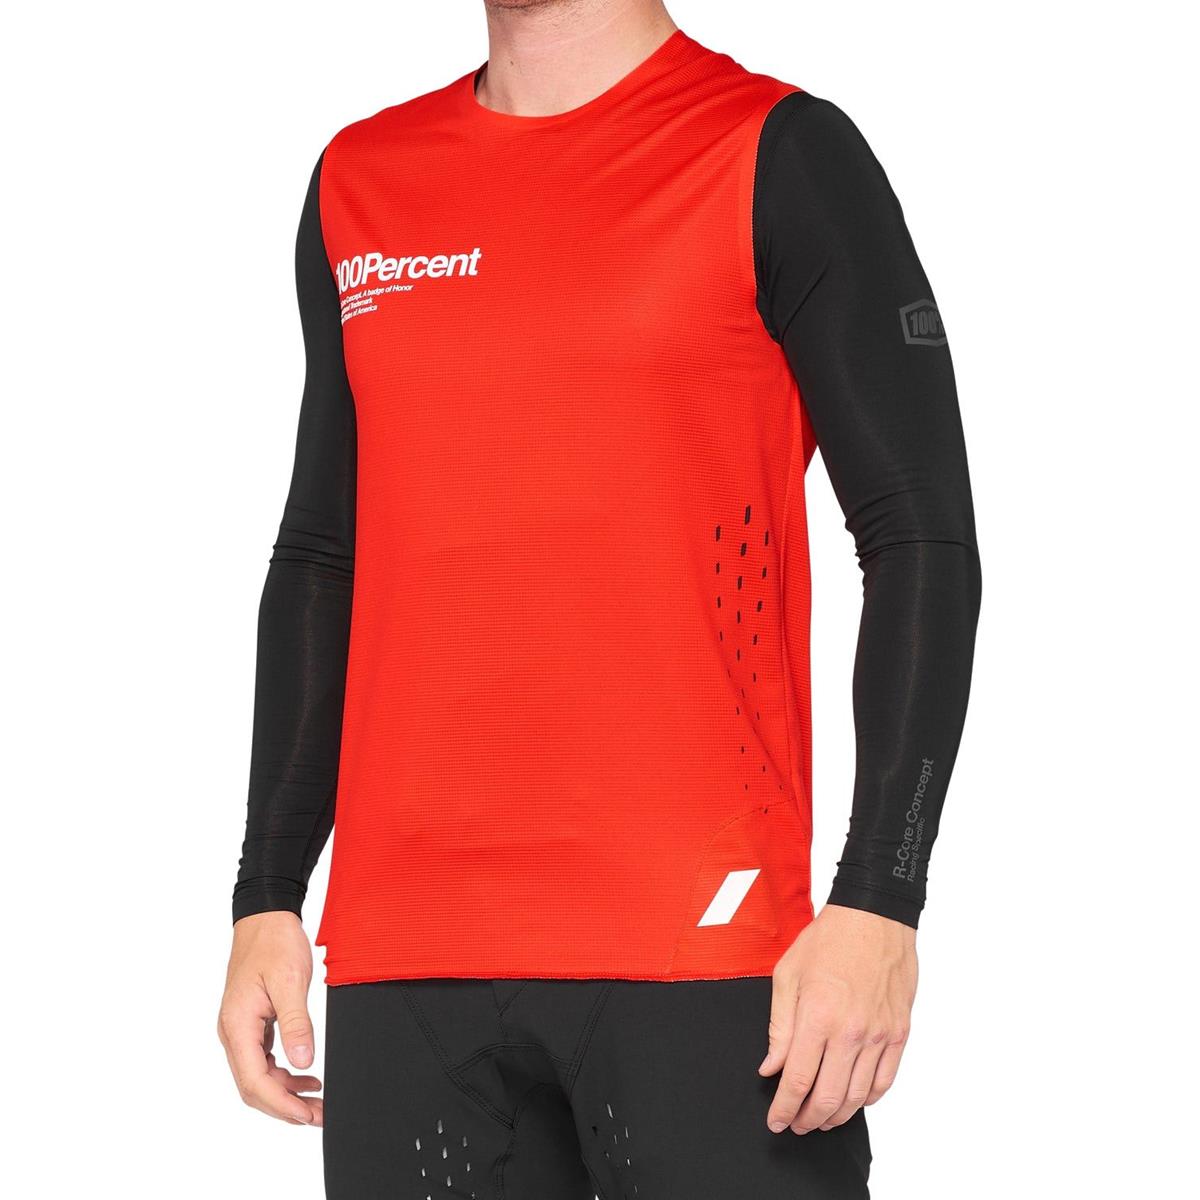 100% MTB Jersey Sleeveless R-Core Concept Red